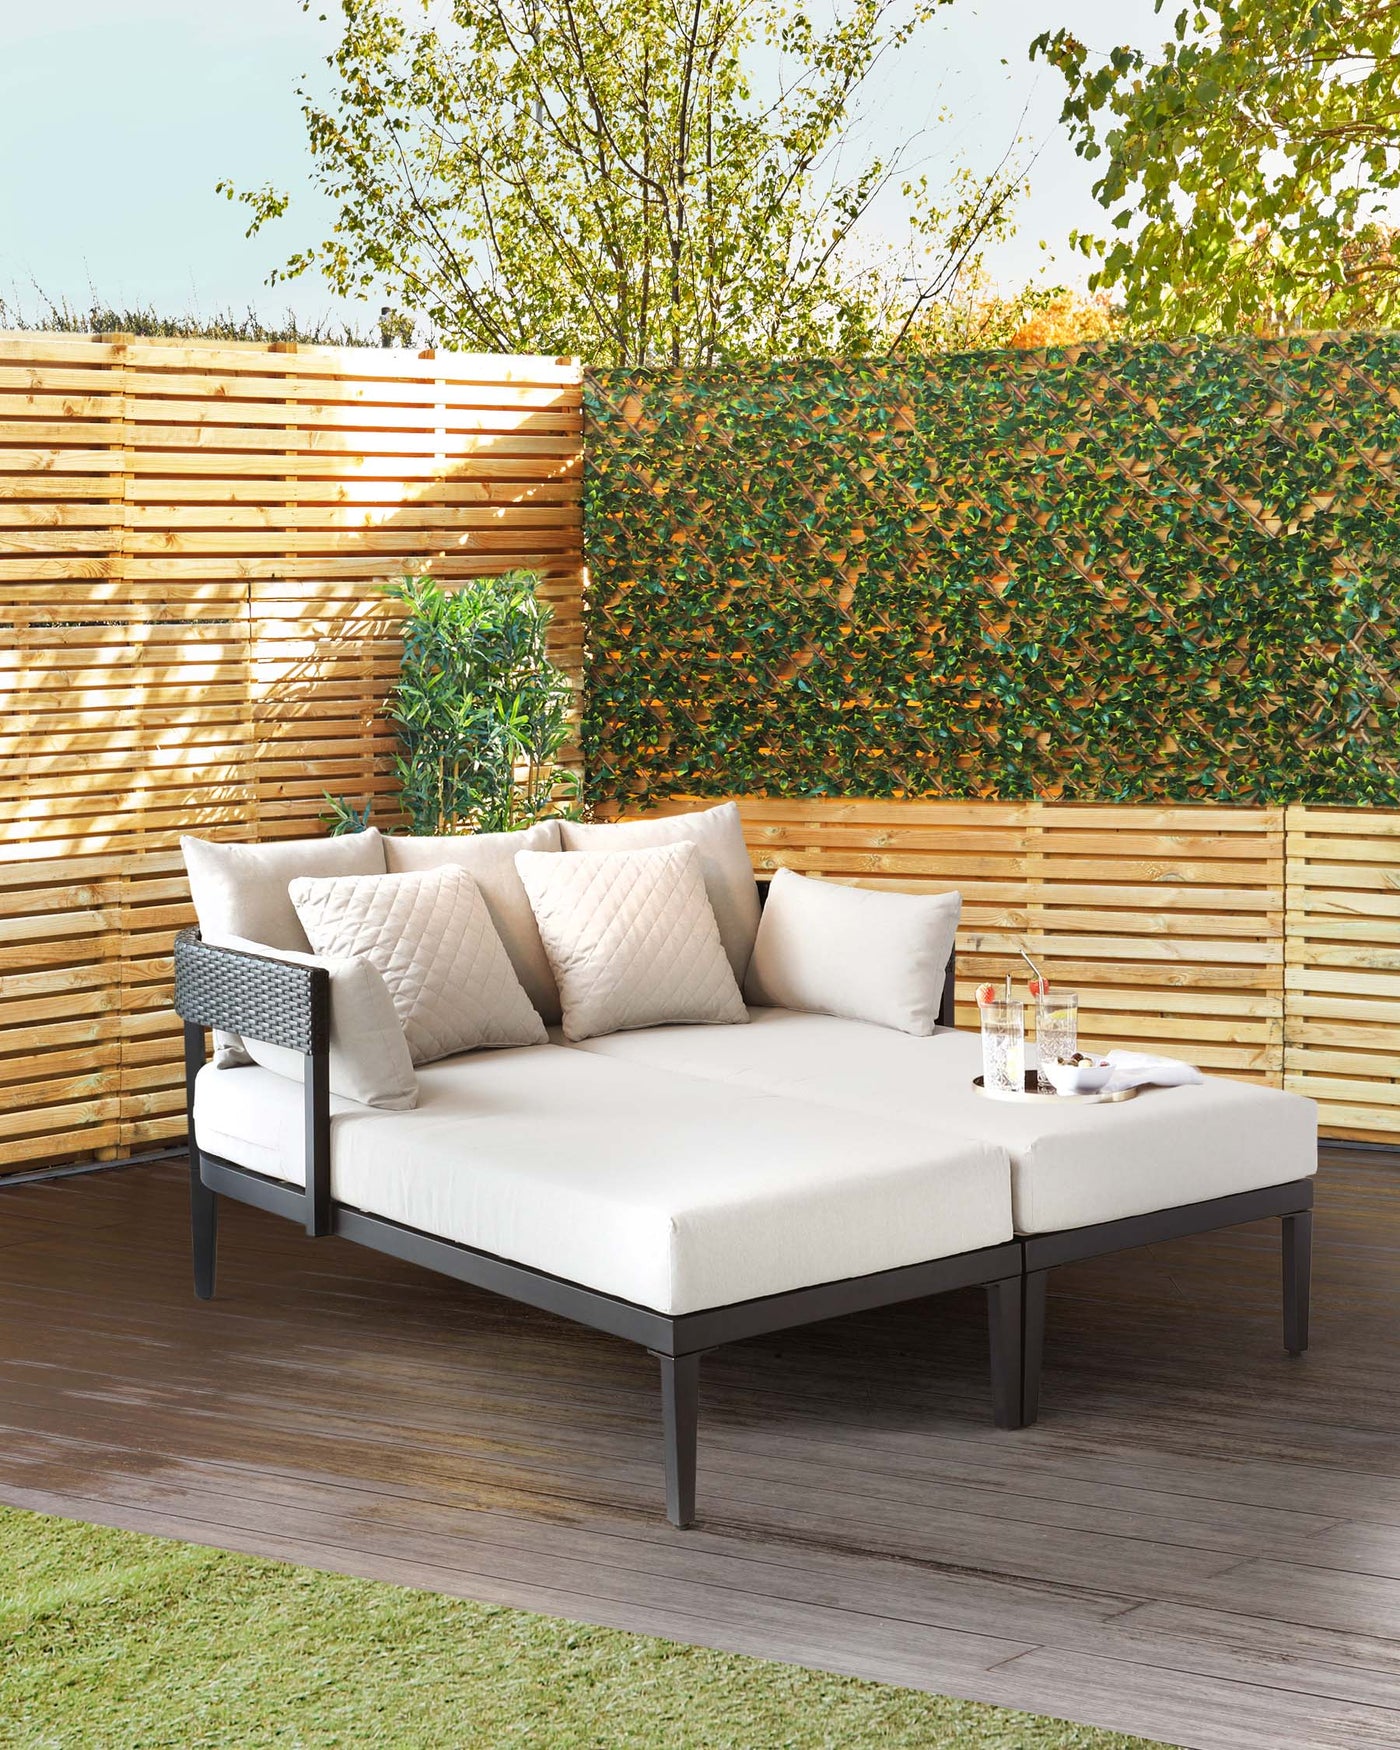 Shiloh Black Rattan Day Bed Lounger